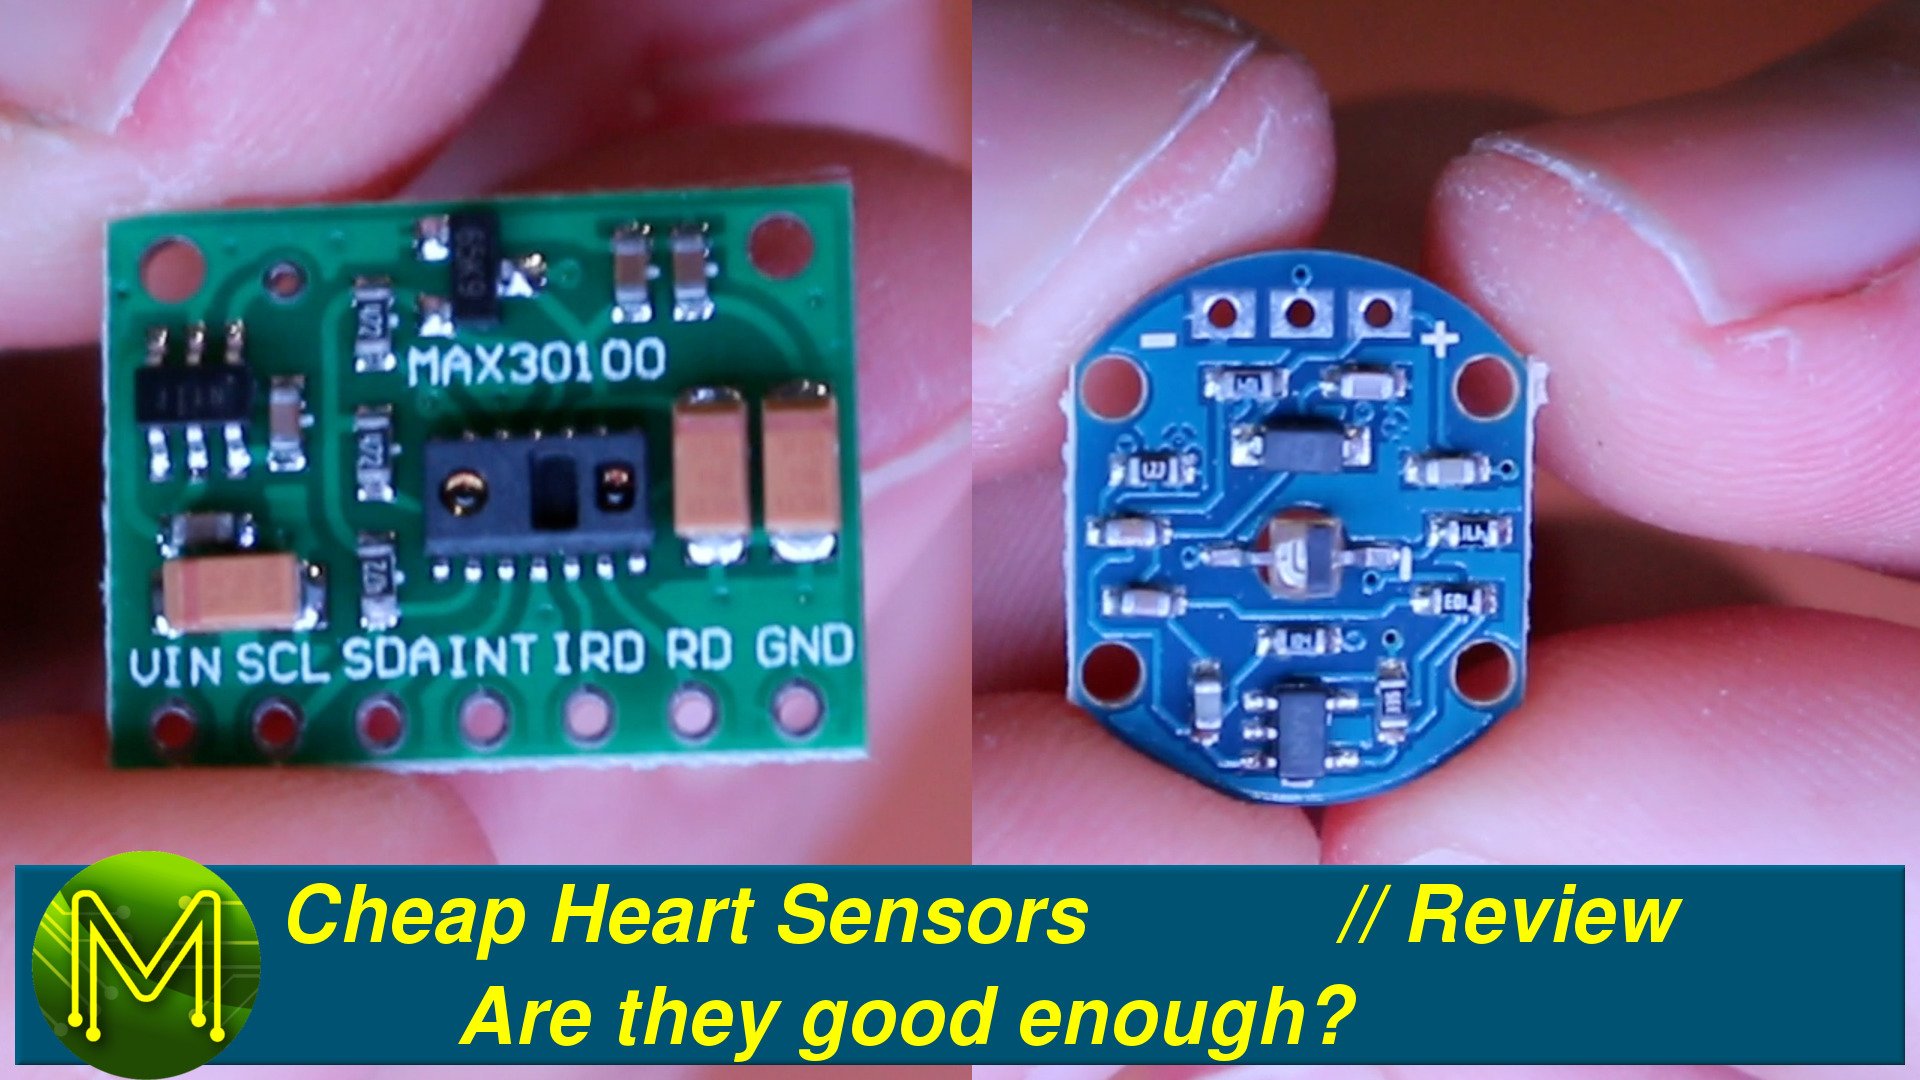 Cheap Heart Sensors: Are they good enough? - Review